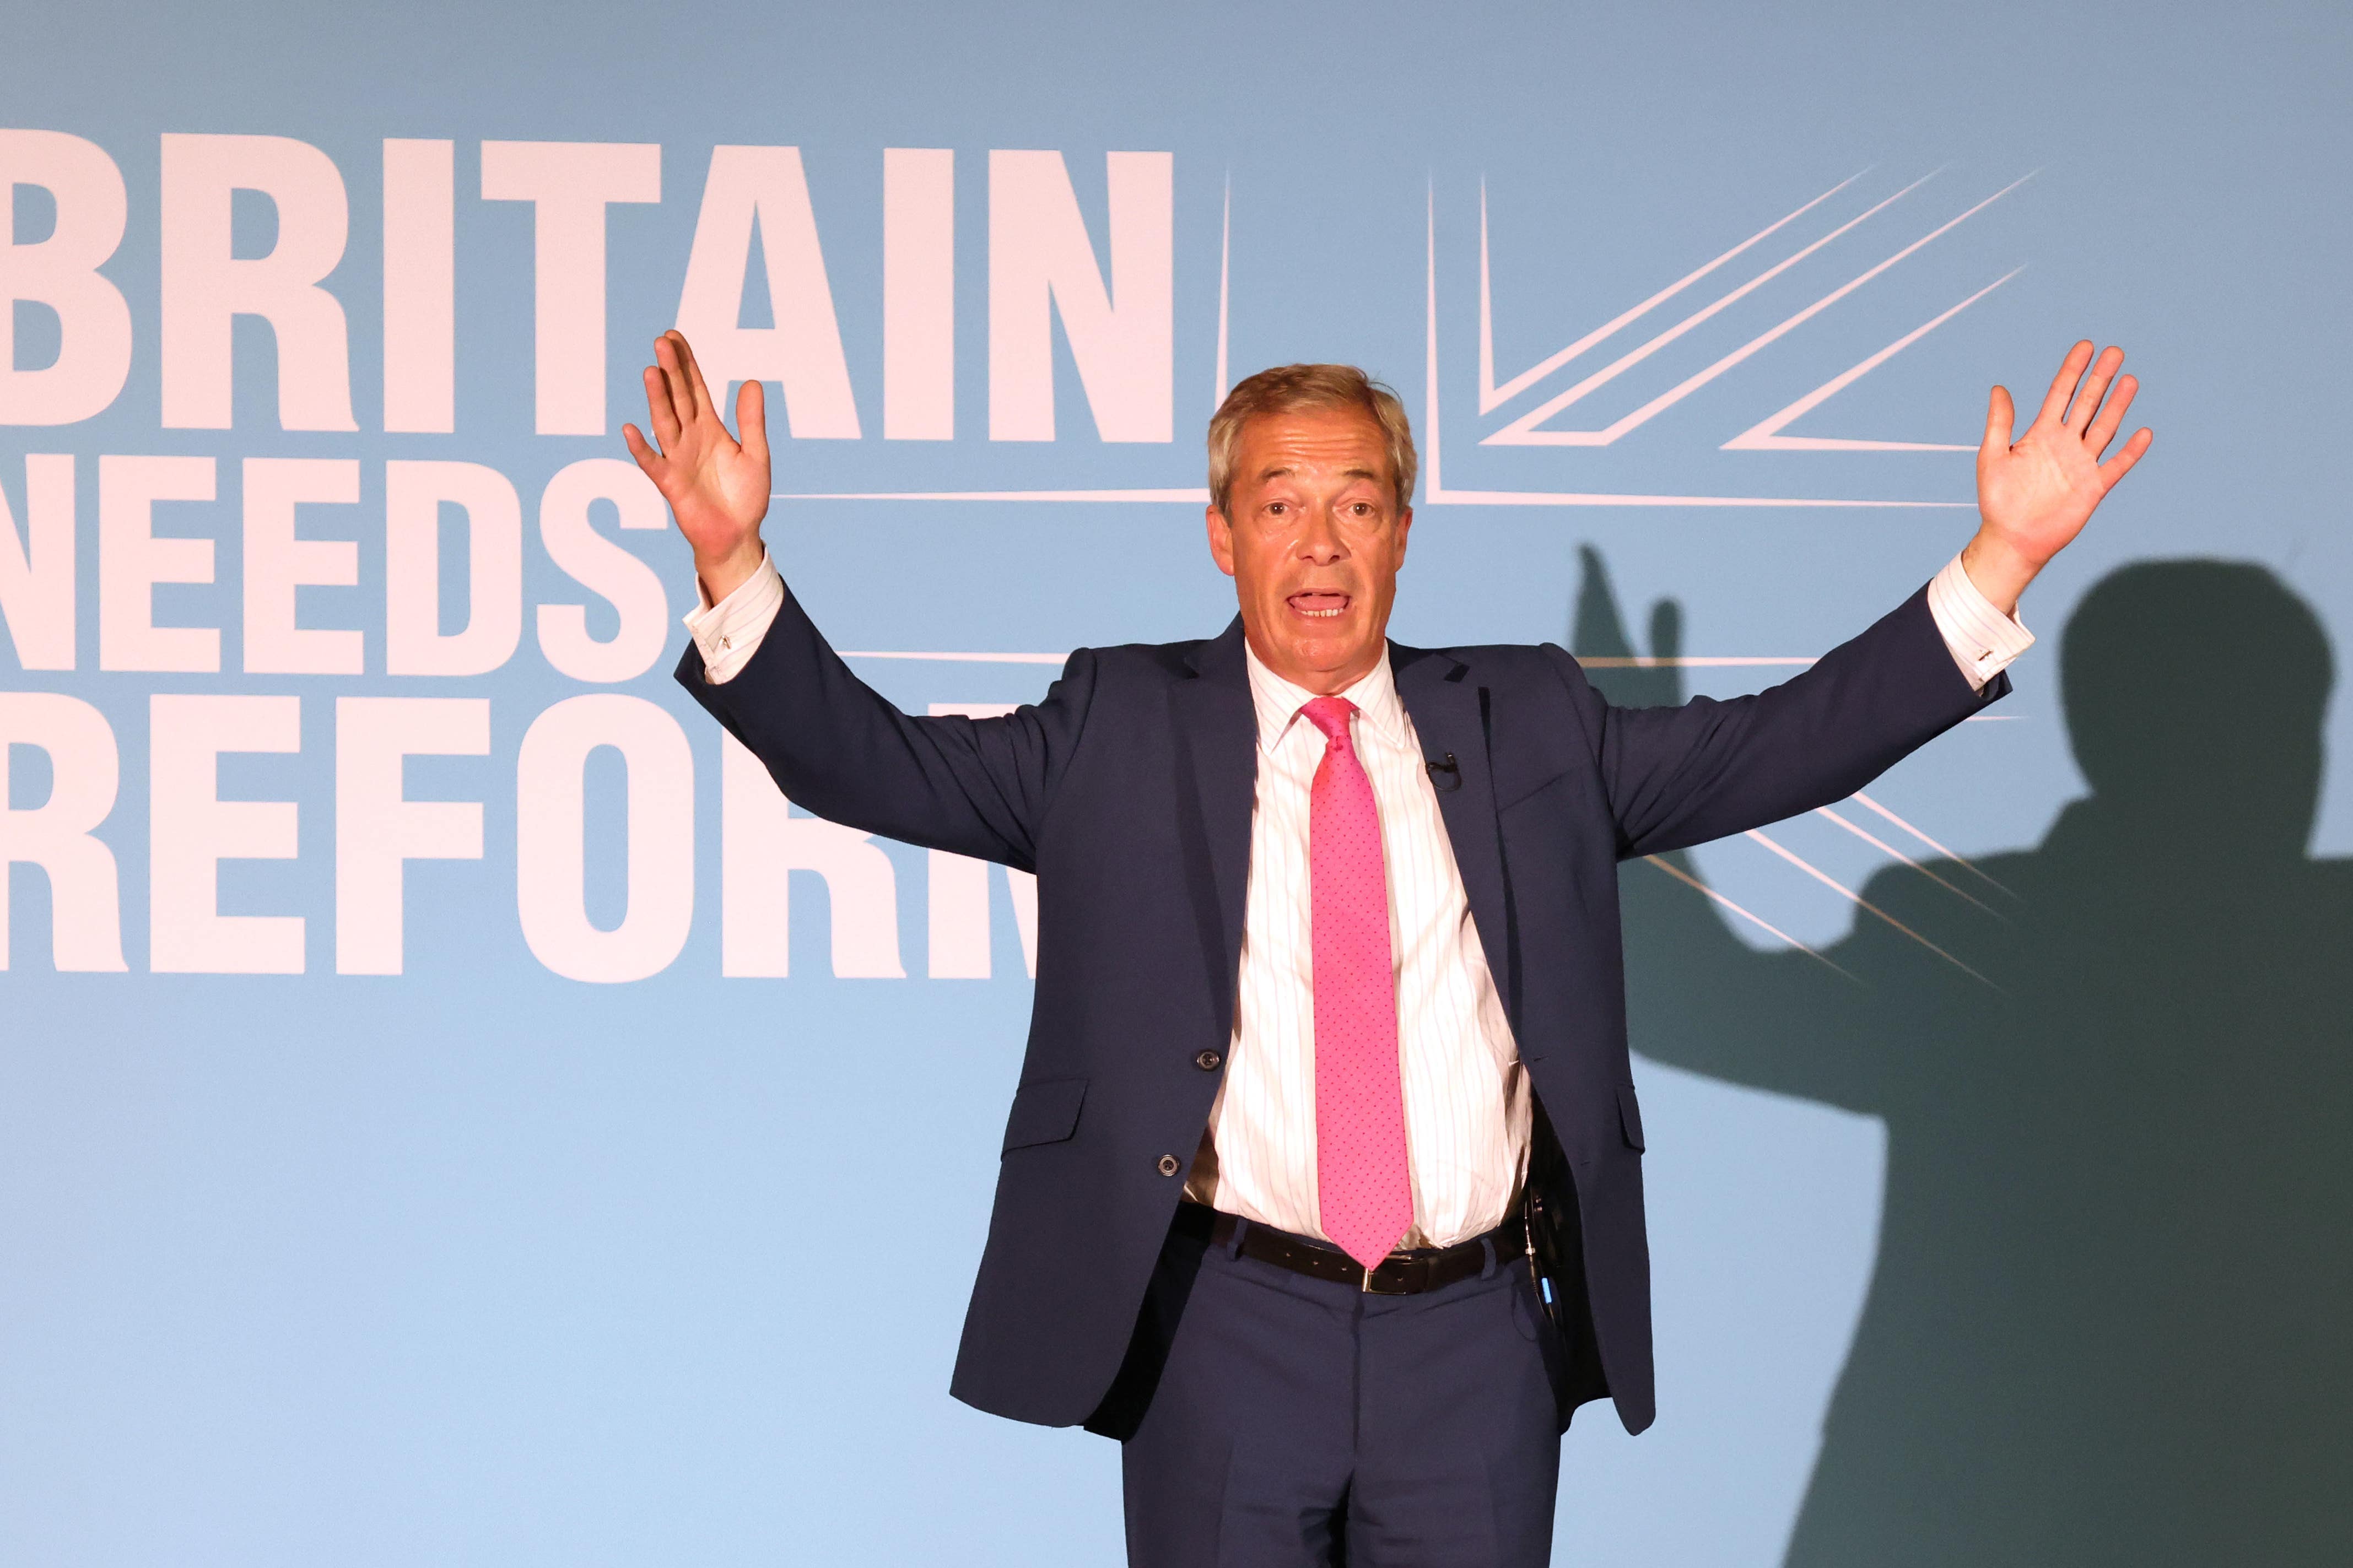 Reform UK Leader Nigel Farage speaking at a meeting in Boston, while on the General Election campaign trail